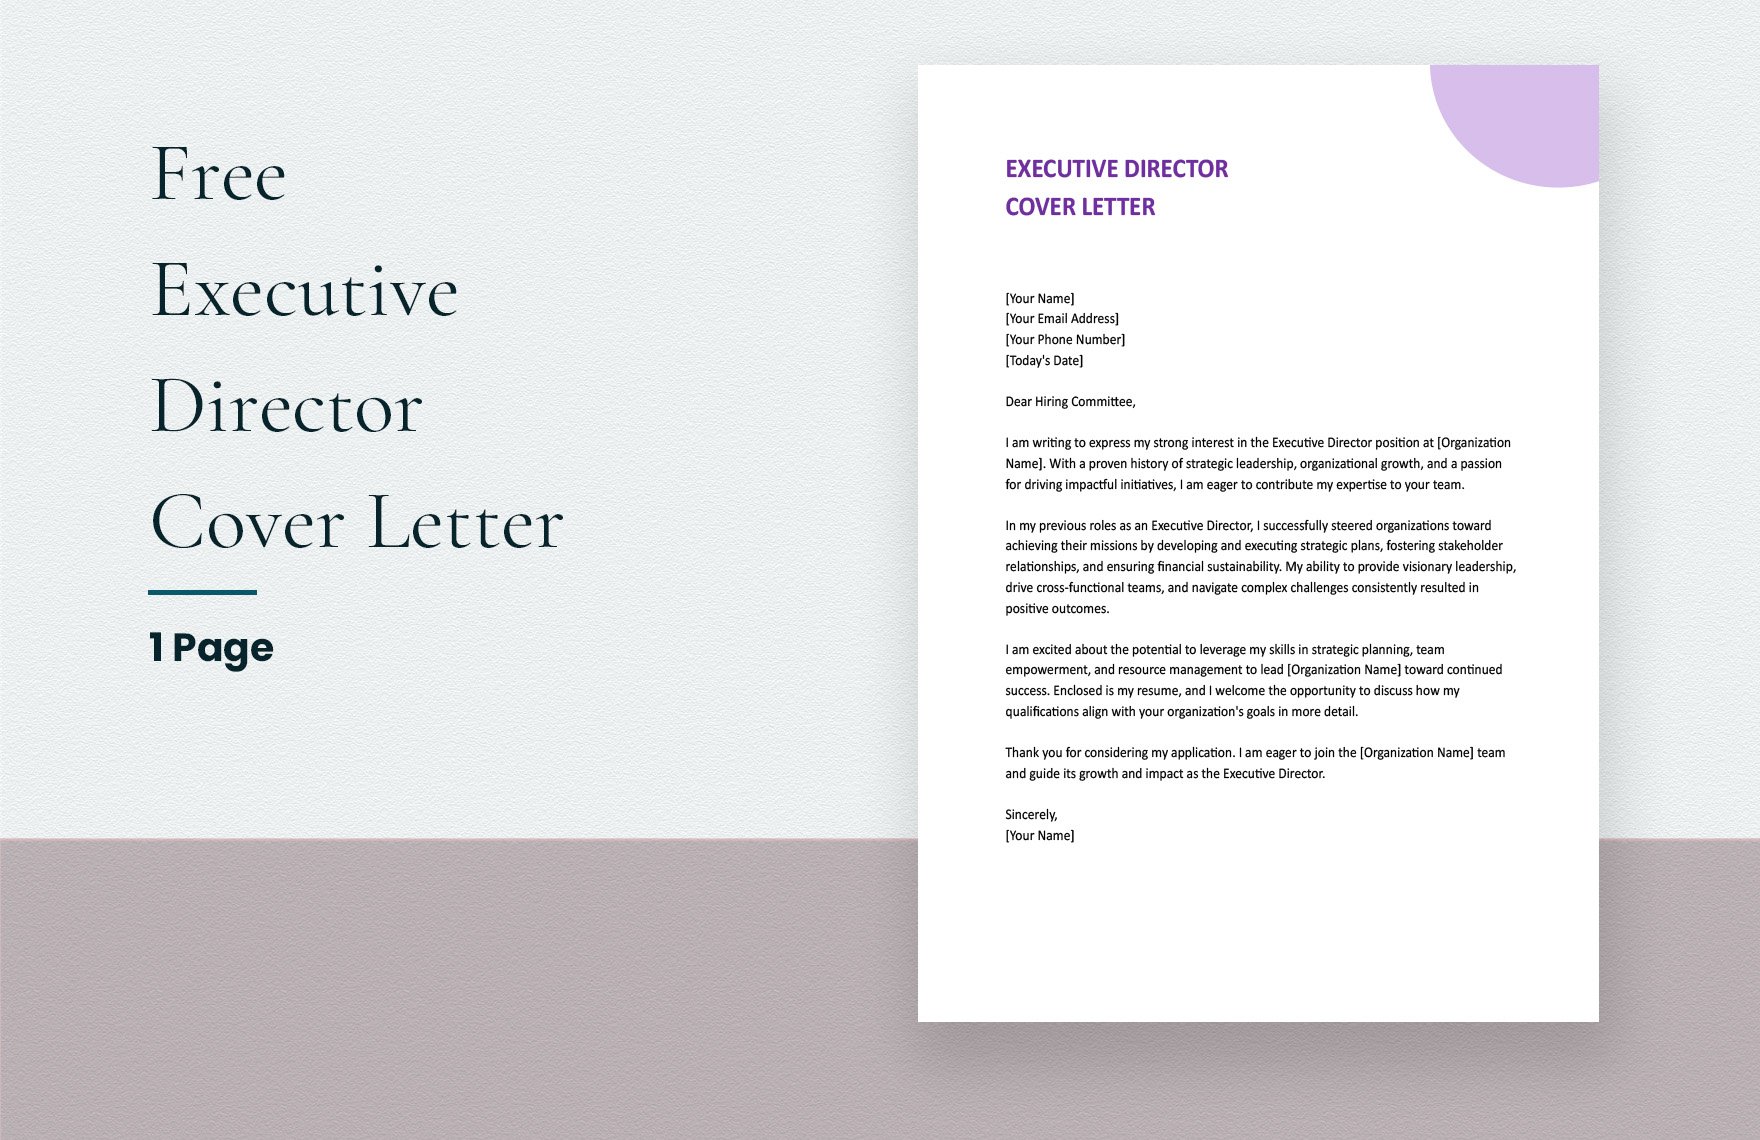 Executive Director Cover Letter